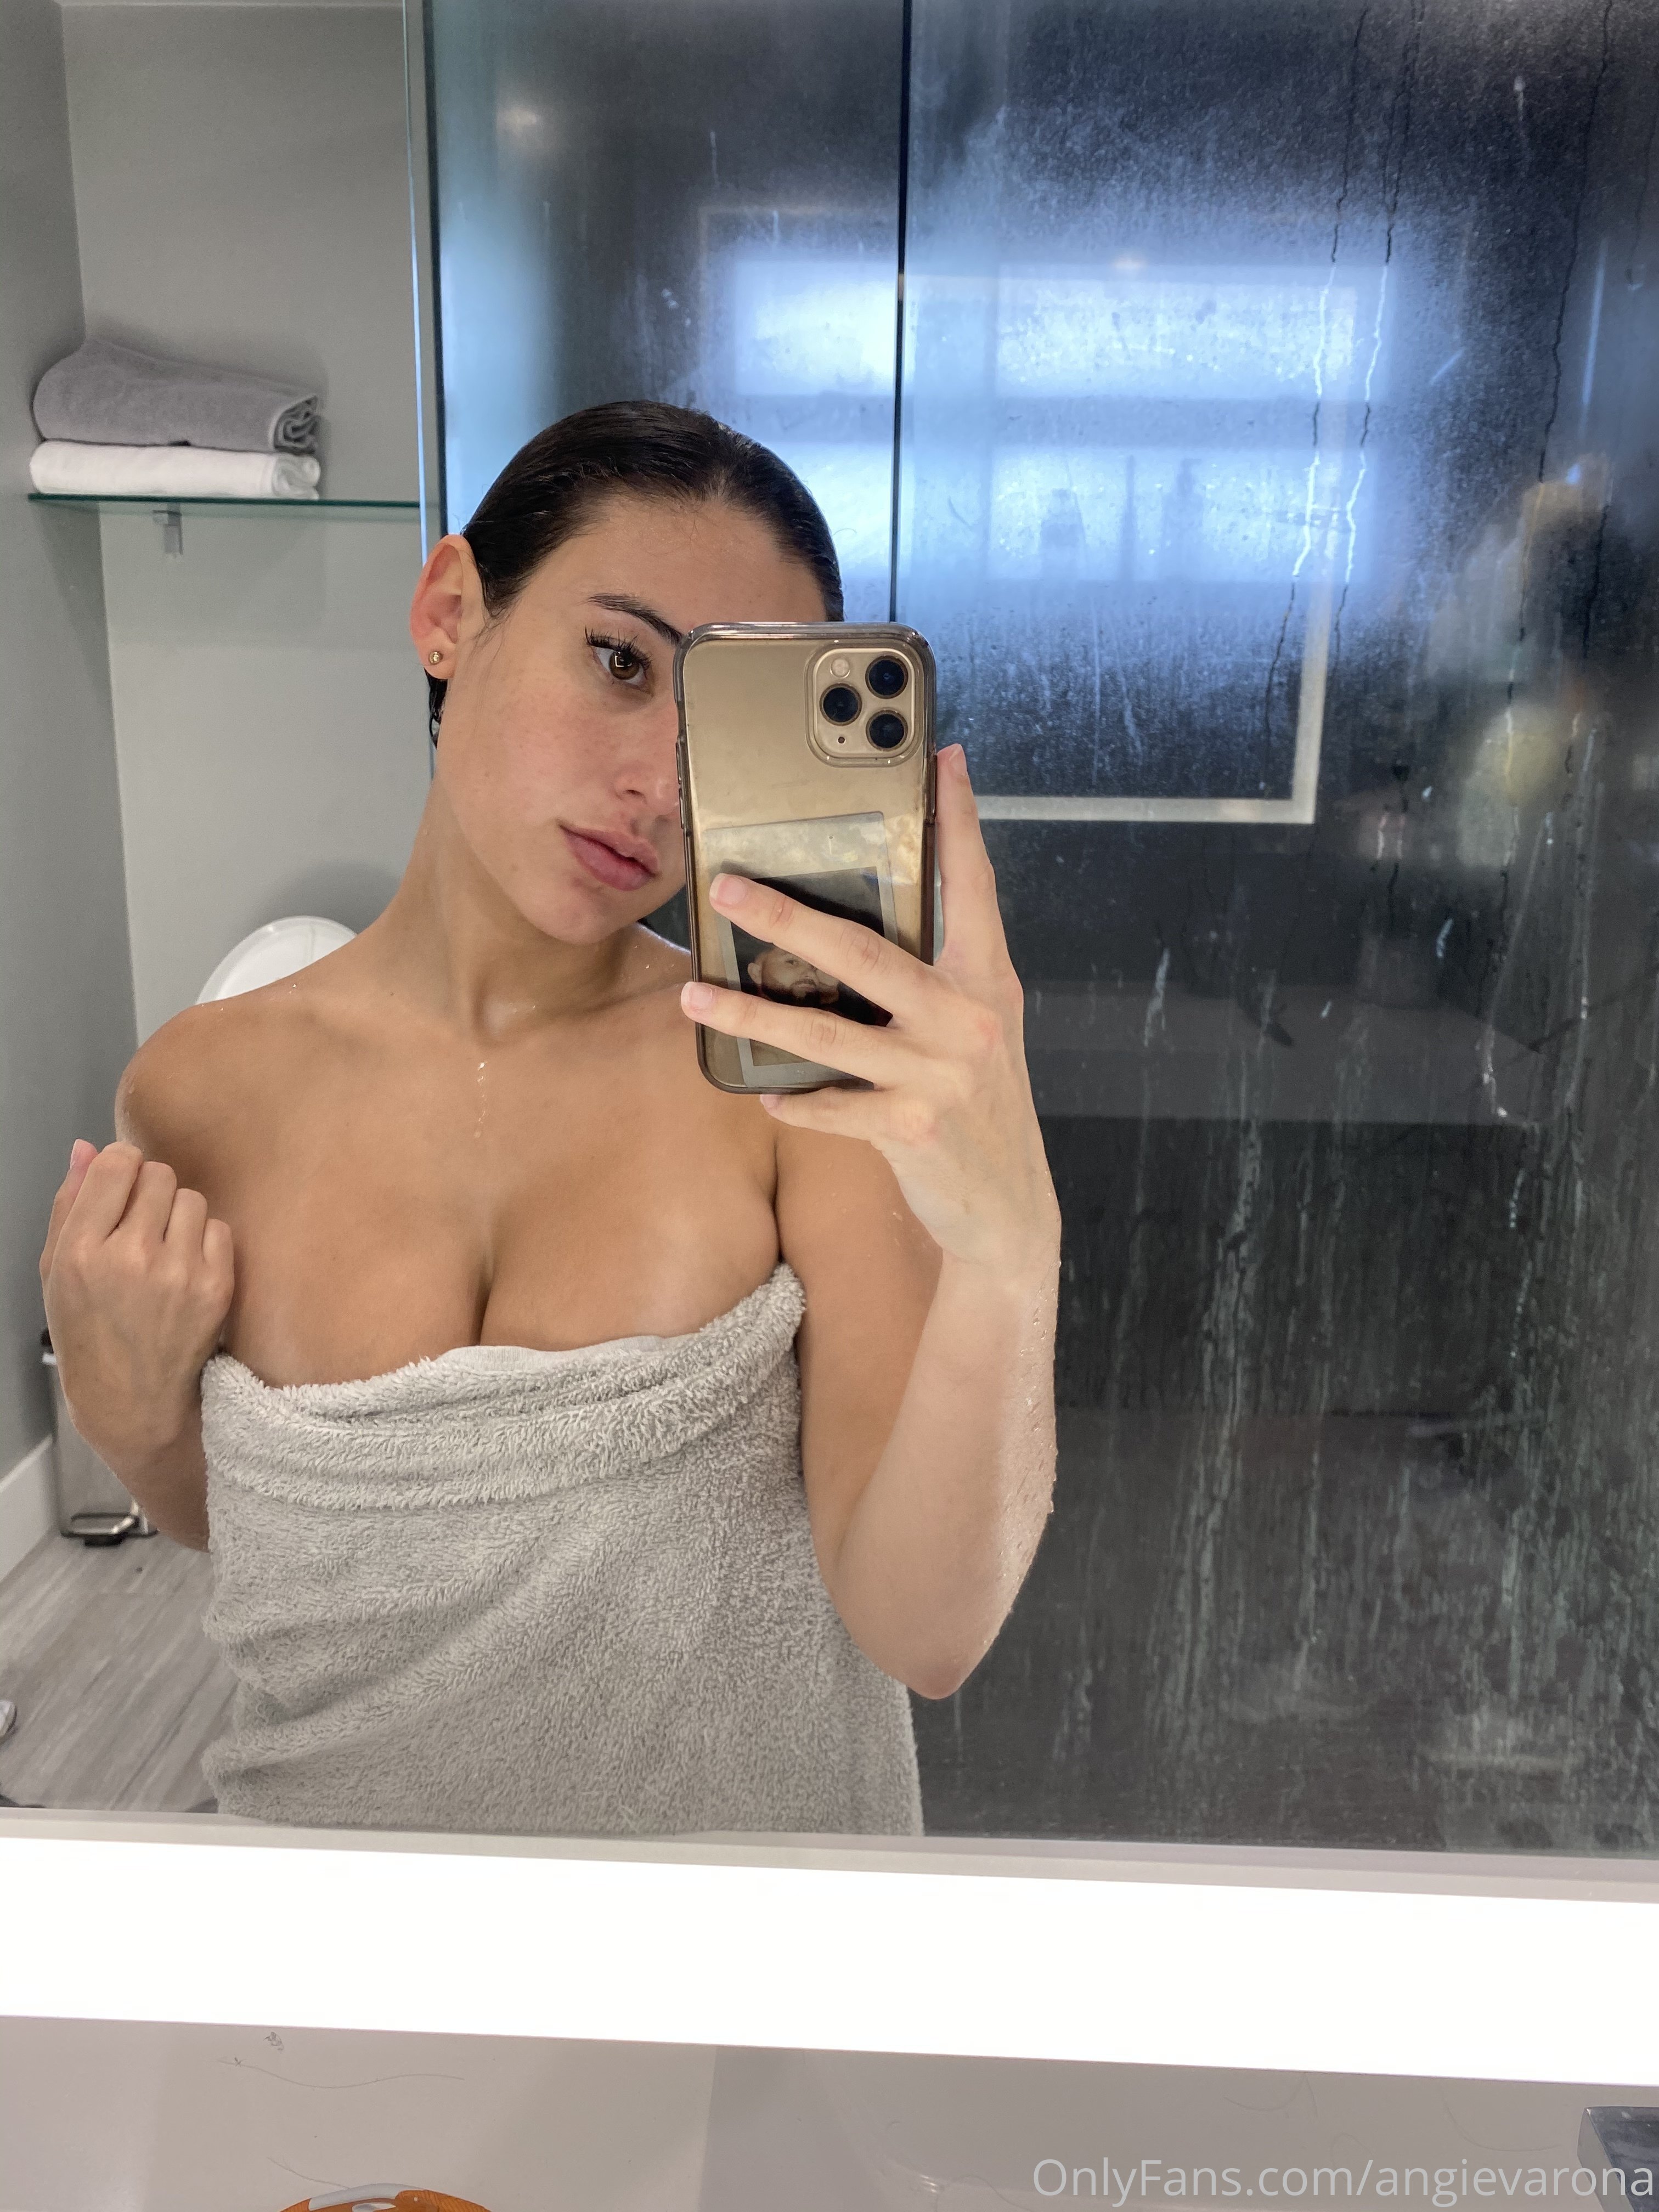 Angie varona only fans leaks